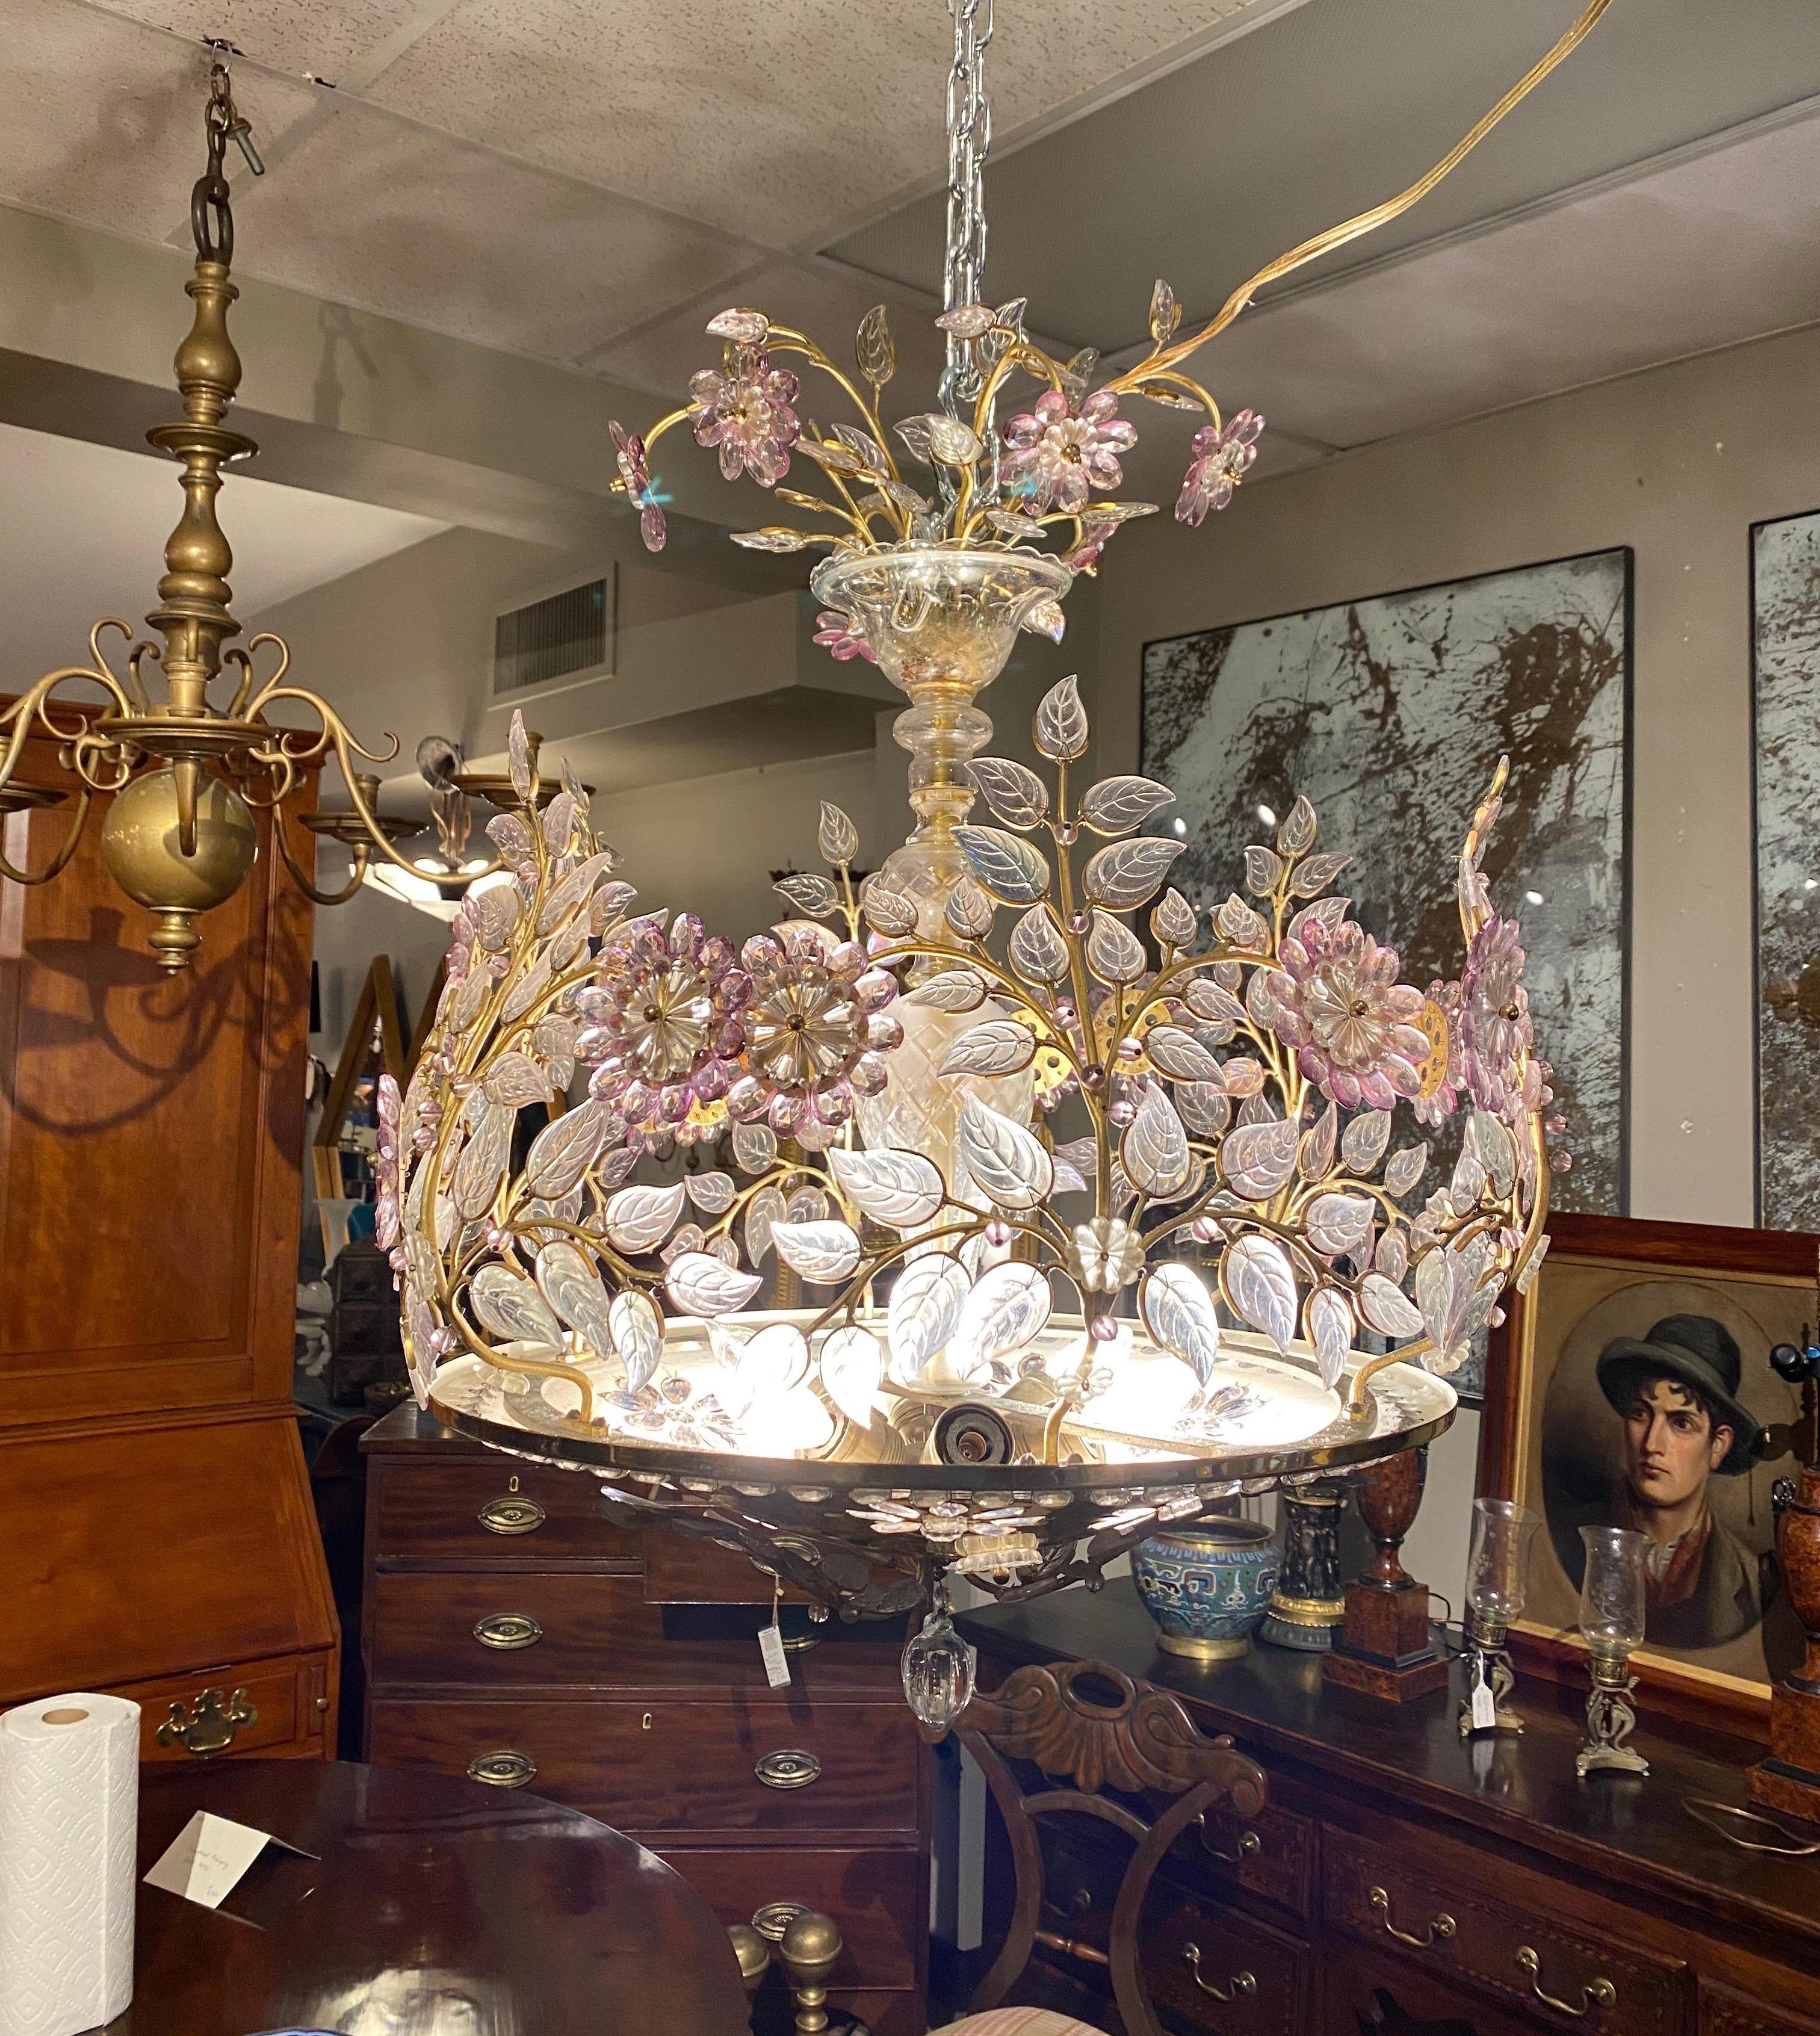 Incredible 6-light midcentury French chandelier by Maison Baguès. Wonderfully colored glass petals and leaves on scrolling bronze branches. Lights shine through the prisms inlaid into the brass bowl from beneath the chandelier.
     